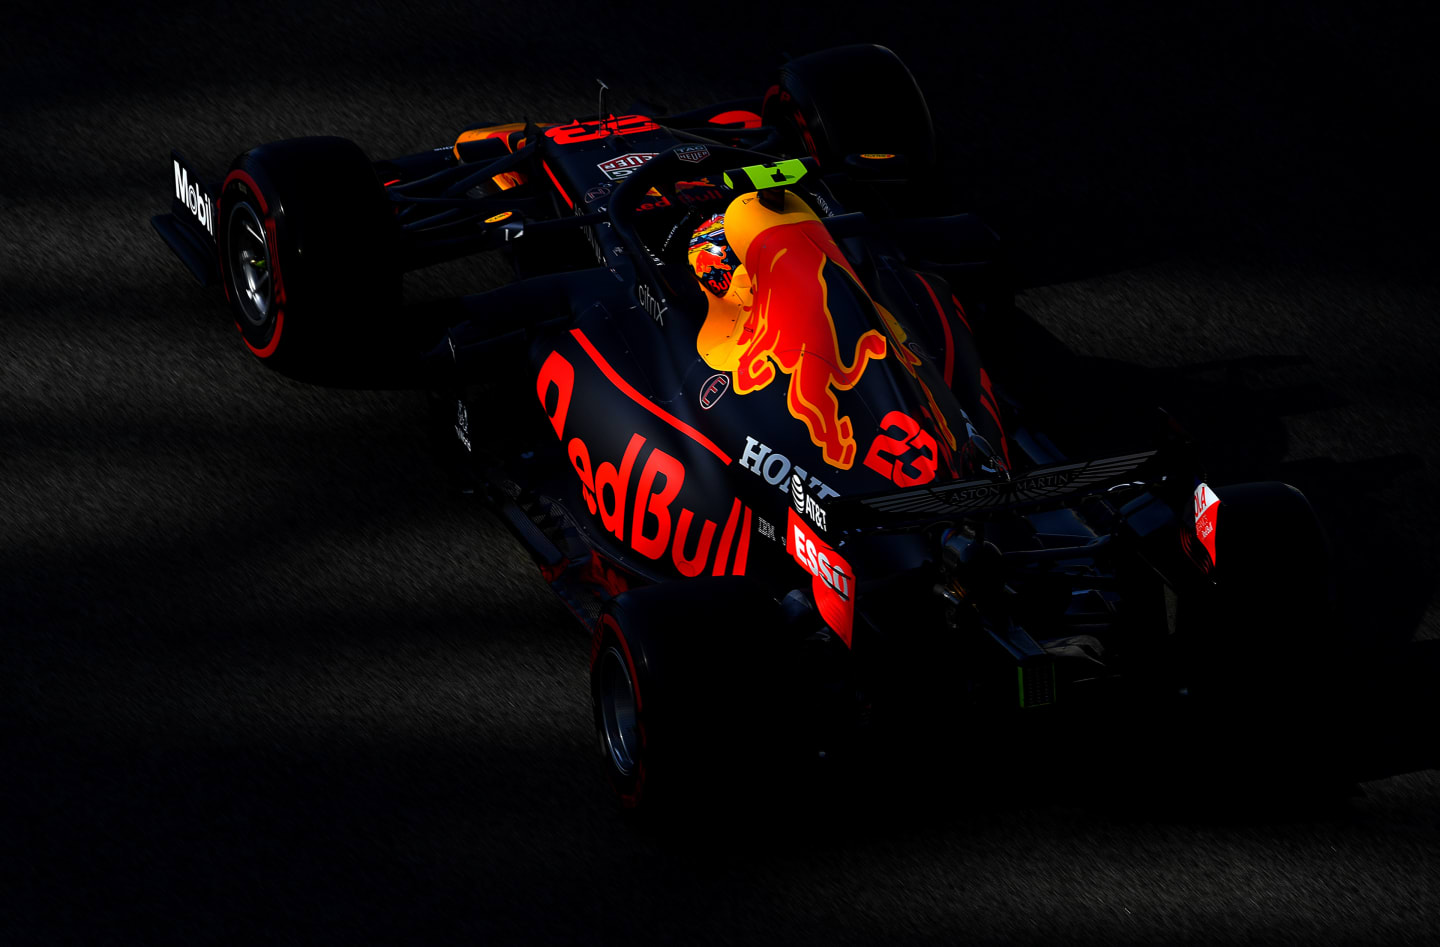 ABU DHABI, UNITED ARAB EMIRATES - DECEMBER 11: Alexander Albon of Thailand driving the (23) Aston Martin Red Bull Racing RB16 on track during practice ahead of the F1 Grand Prix of Abu Dhabi at Yas Marina Circuit on December 11, 2020 in Abu Dhabi, United Arab Emirates. (Photo by Clive Mason - Formula 1/Formula 1 via Getty Images)